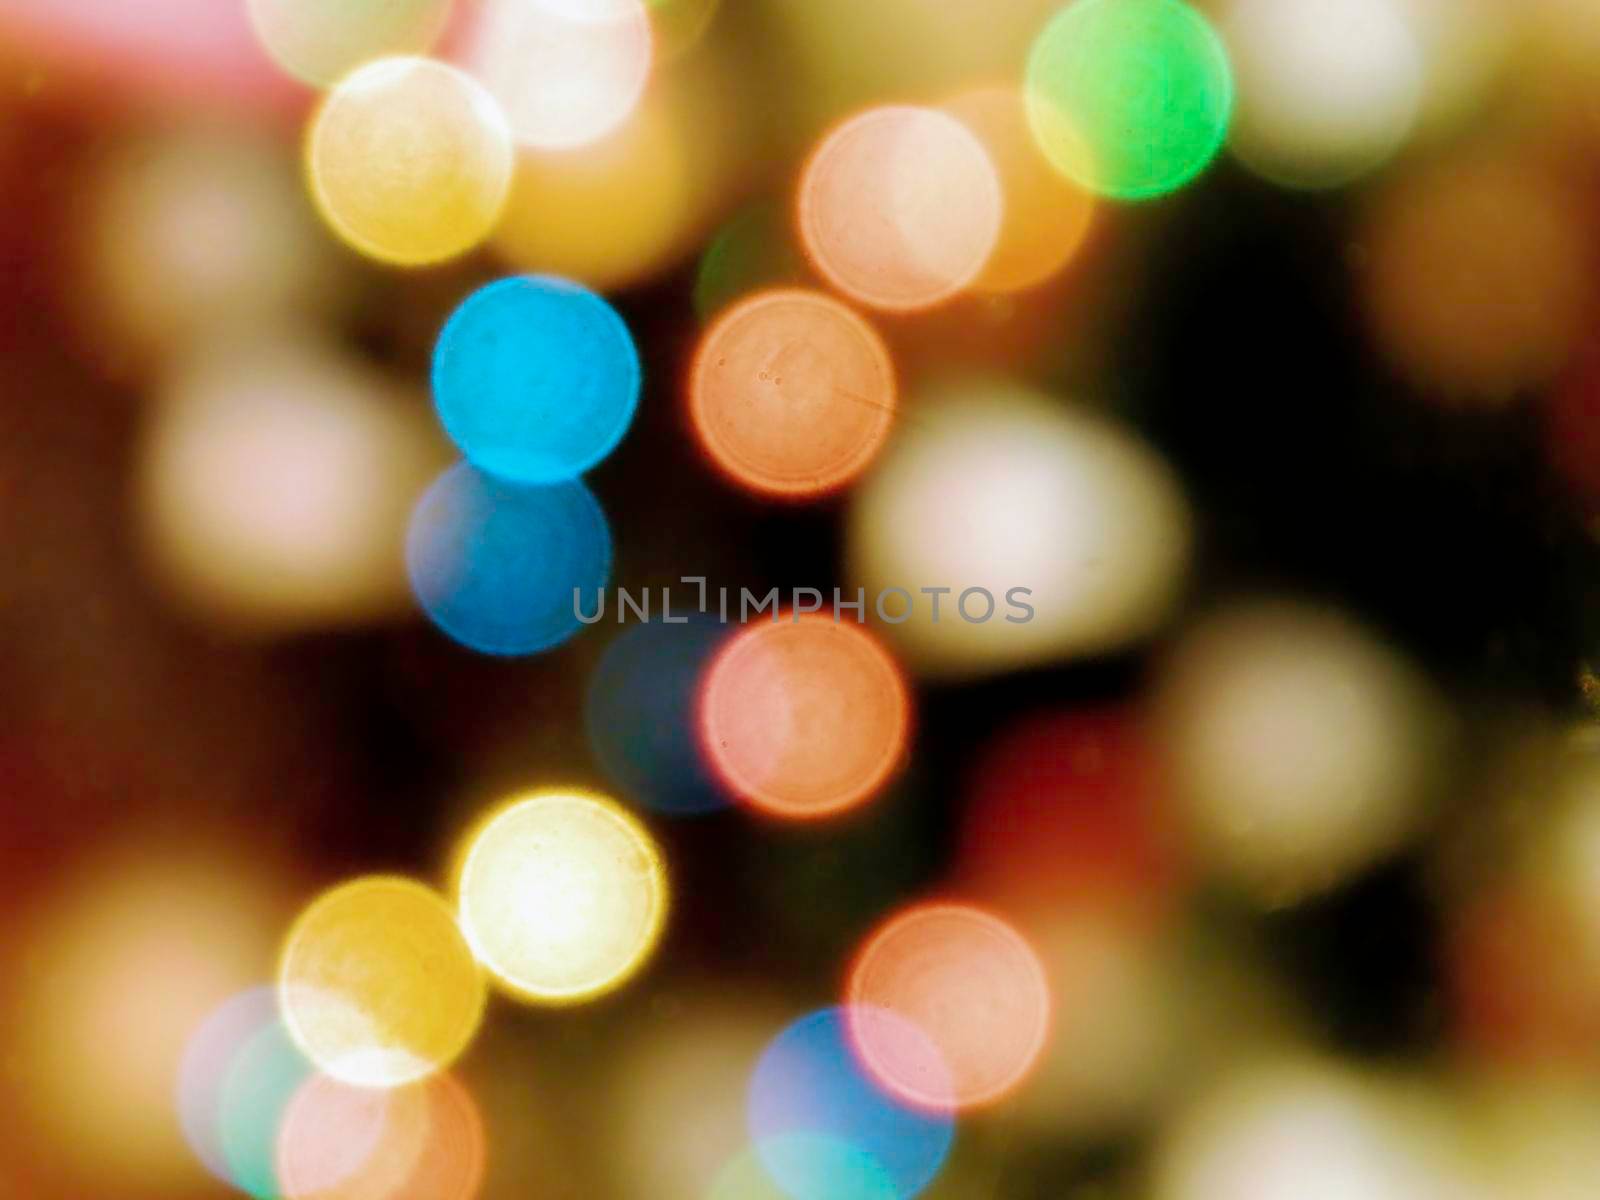 Blur of Christmas wallpaper decorations concept.holiday festival backdrop by milastokerpro